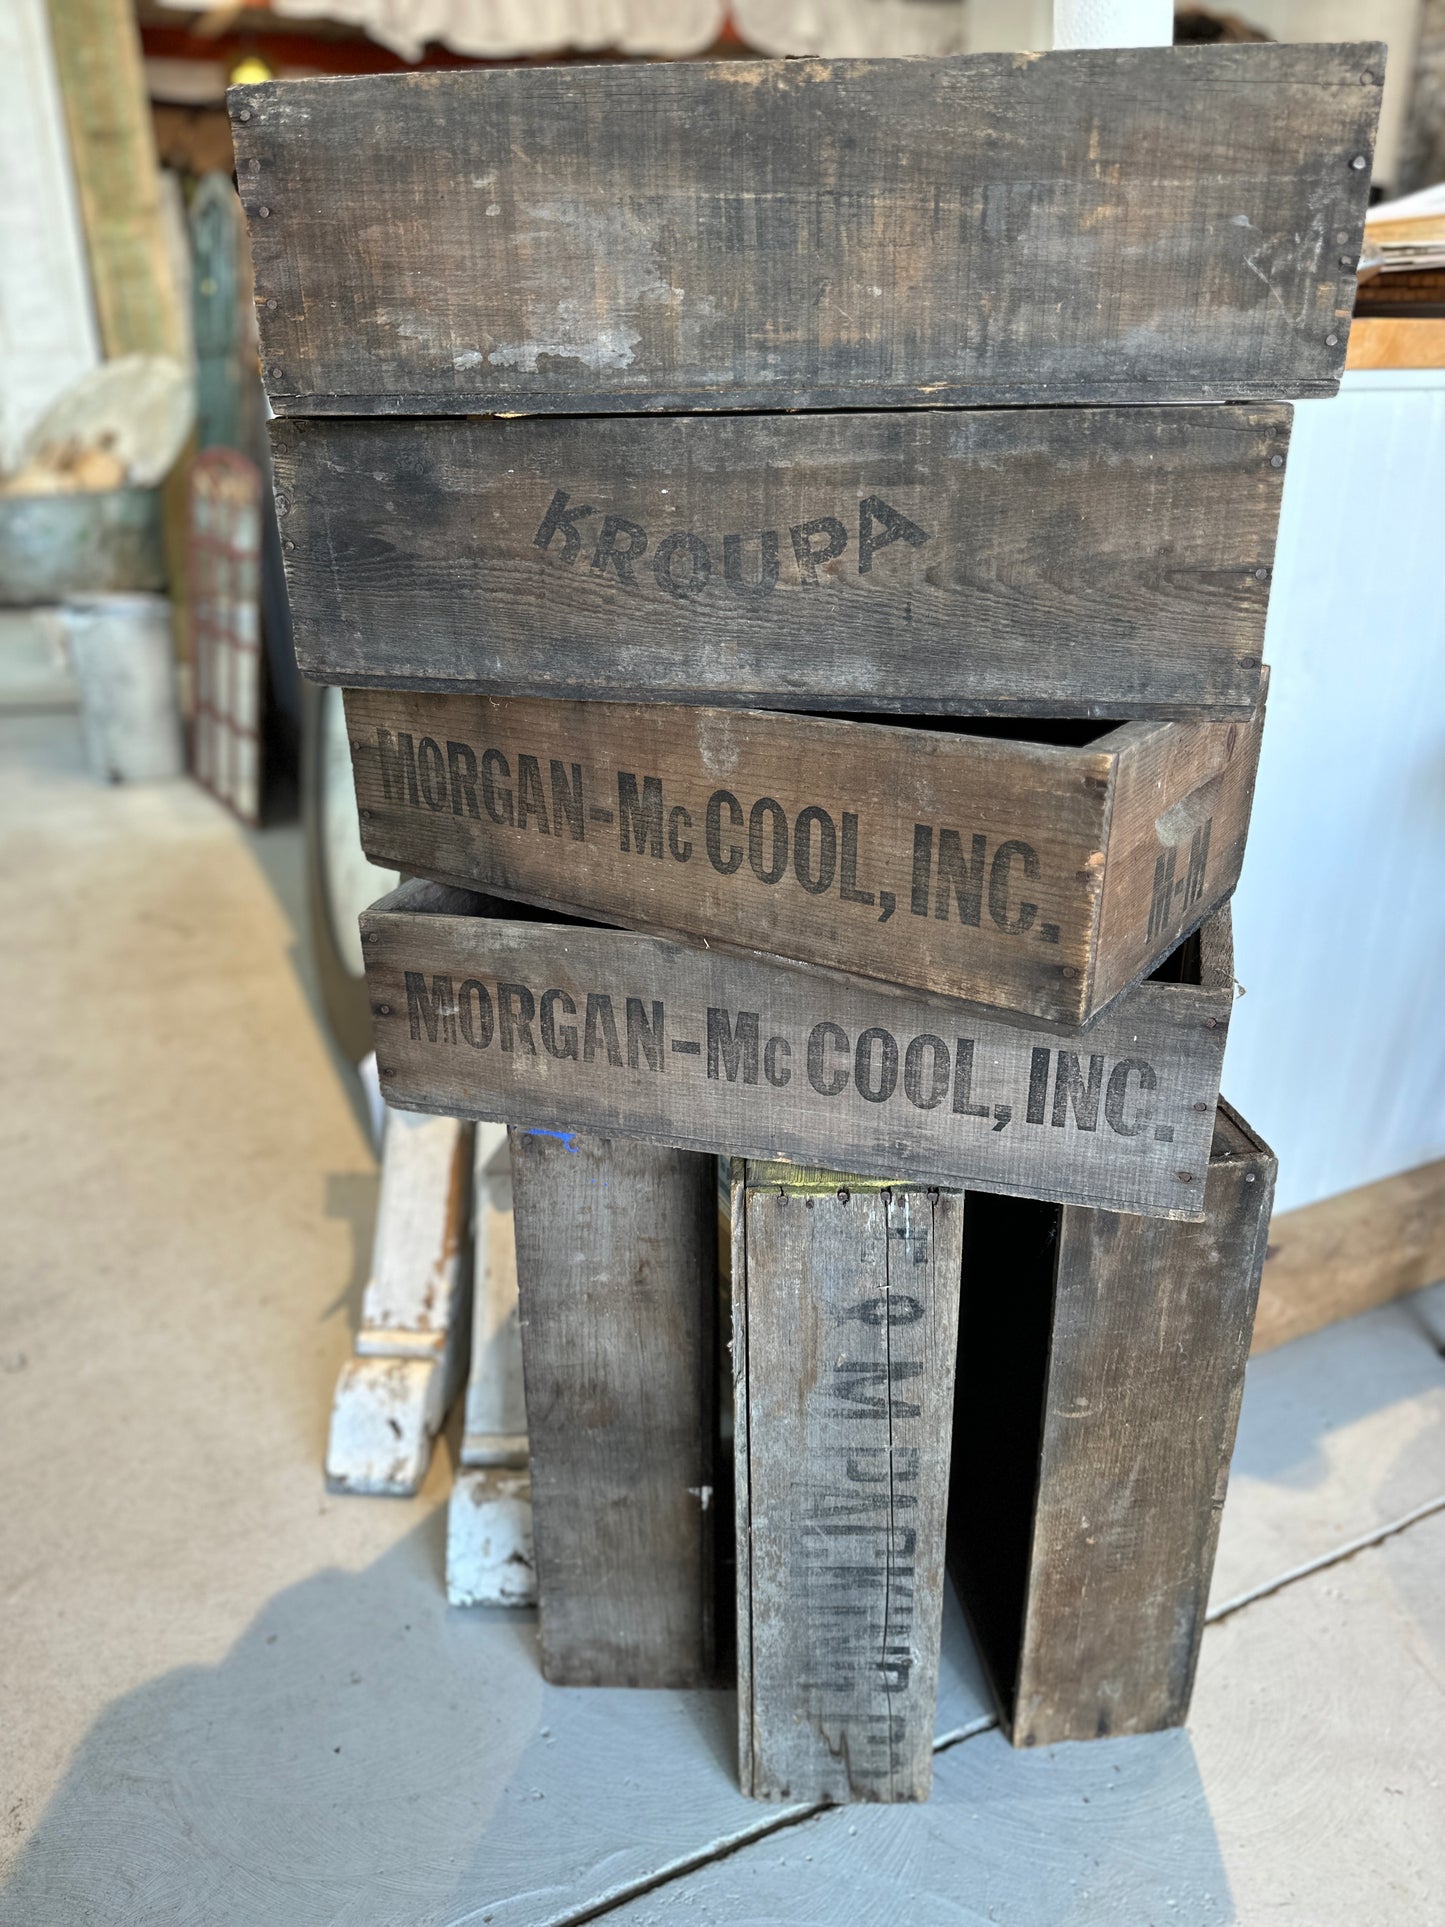 Vintage Wood Cherry Lugs (Crates) from Northwest Lower Michigan